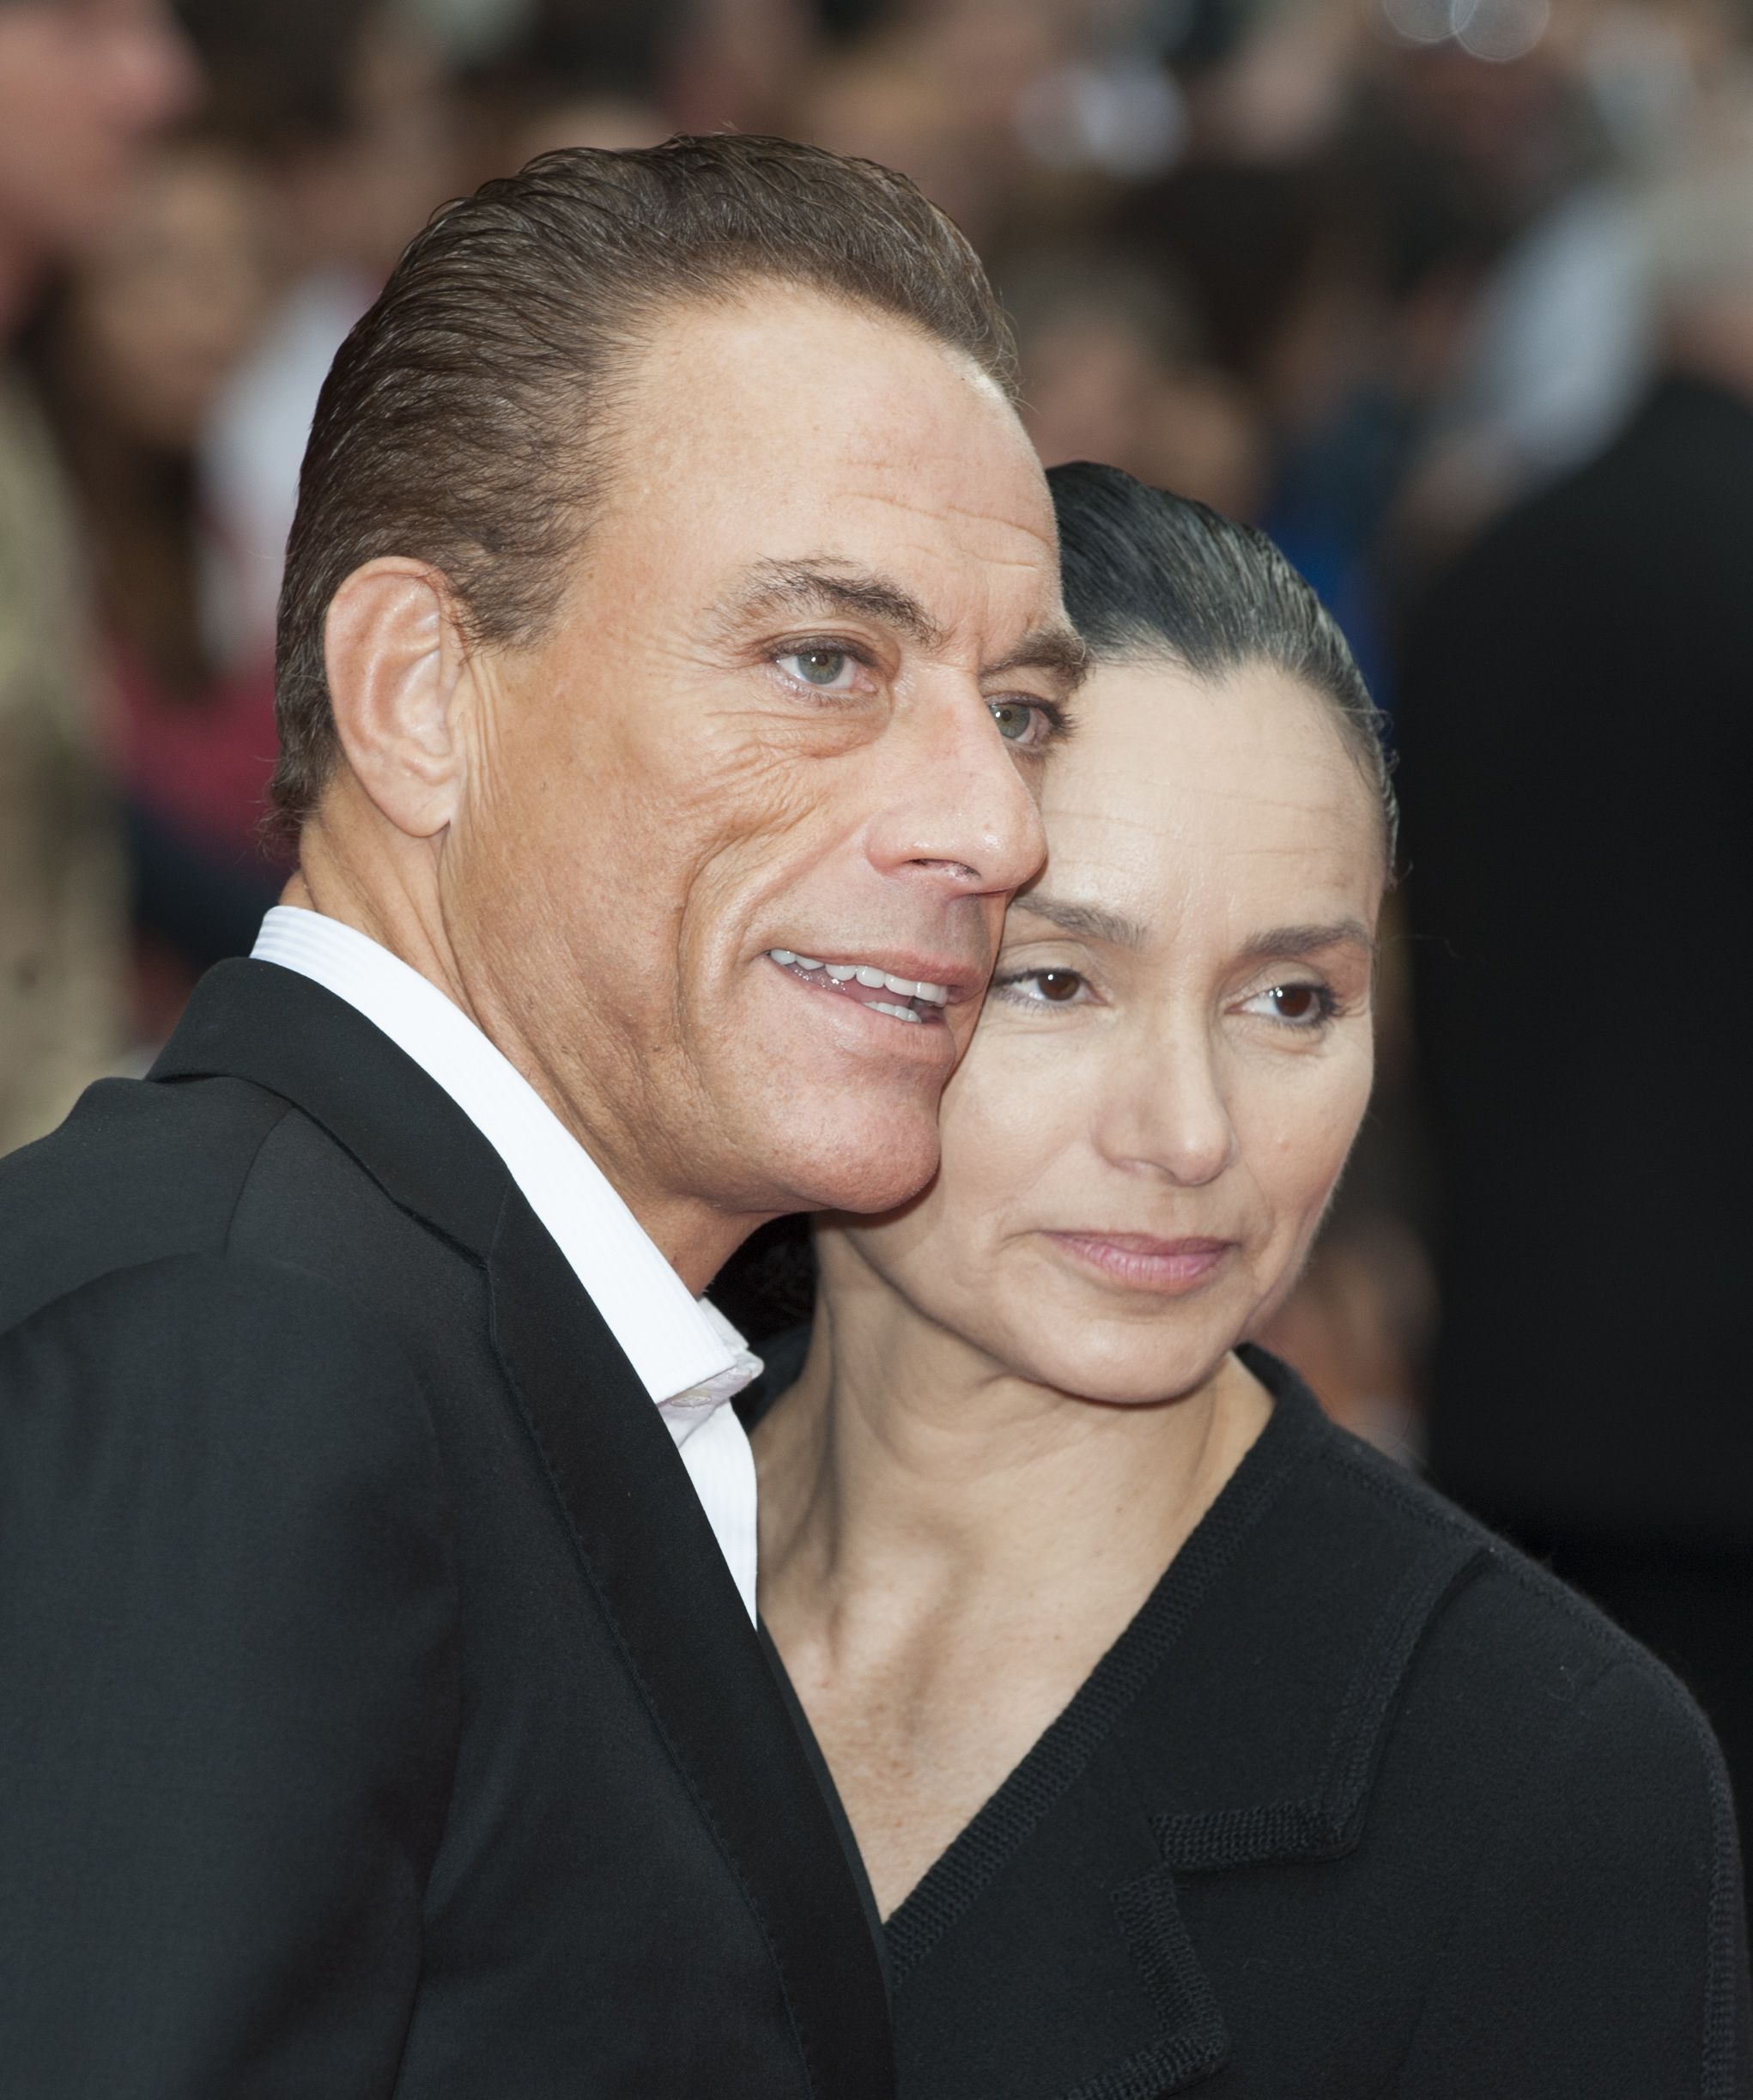 Jean-Claude Van Damme and Gladys Portugues at the Uk Premiere of "The Expendables 2"  on August 10, 2012, at Leicester Square, London | Photo: Mark Cuthbert/UK Press/Getty Images